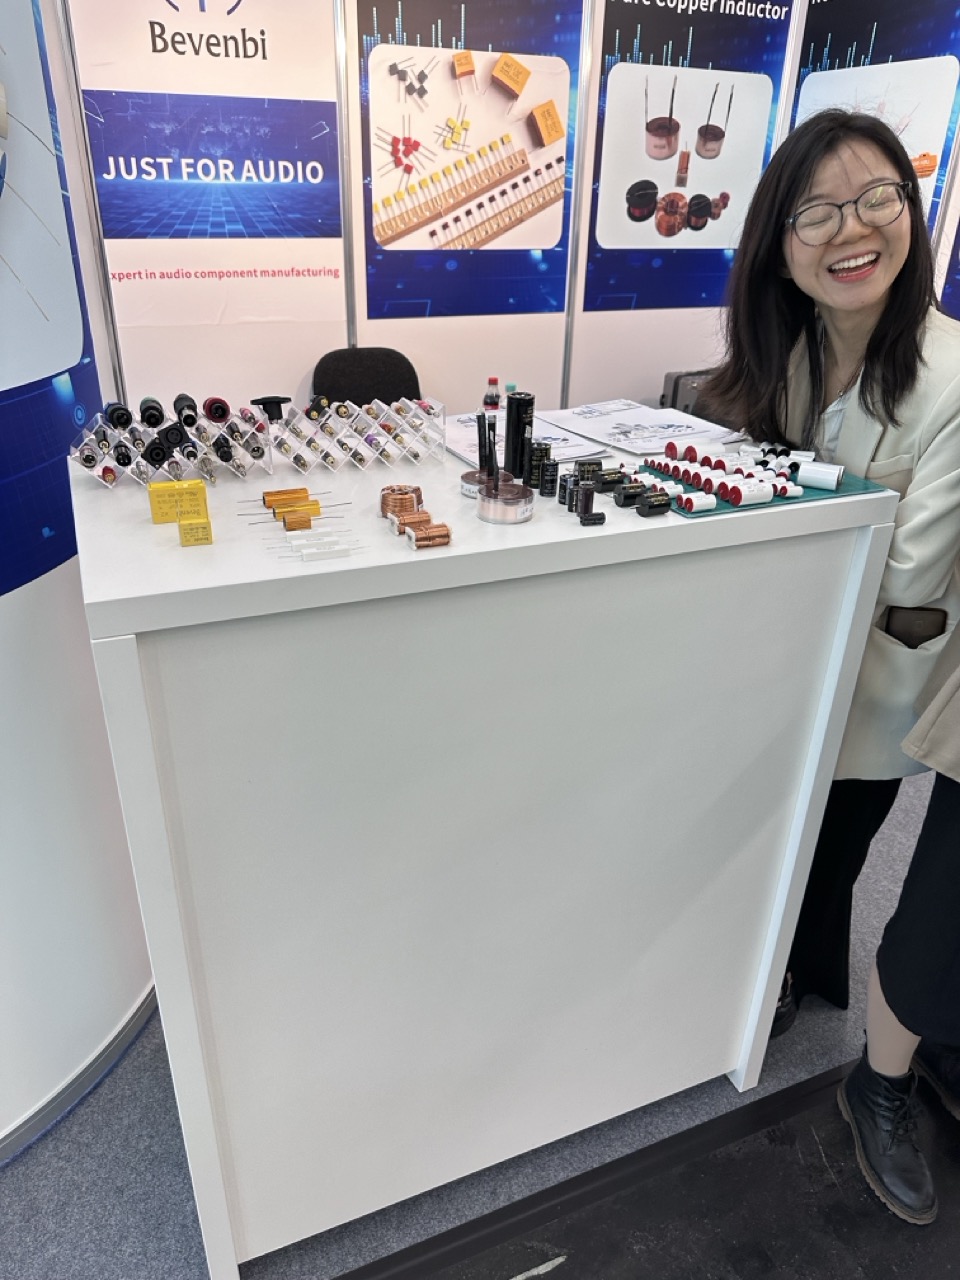 Bevenbi had their stall in the IPS section, a Chinese capacitor maker that may be worth investigating further. There were a handful of similar companies at the IPS.